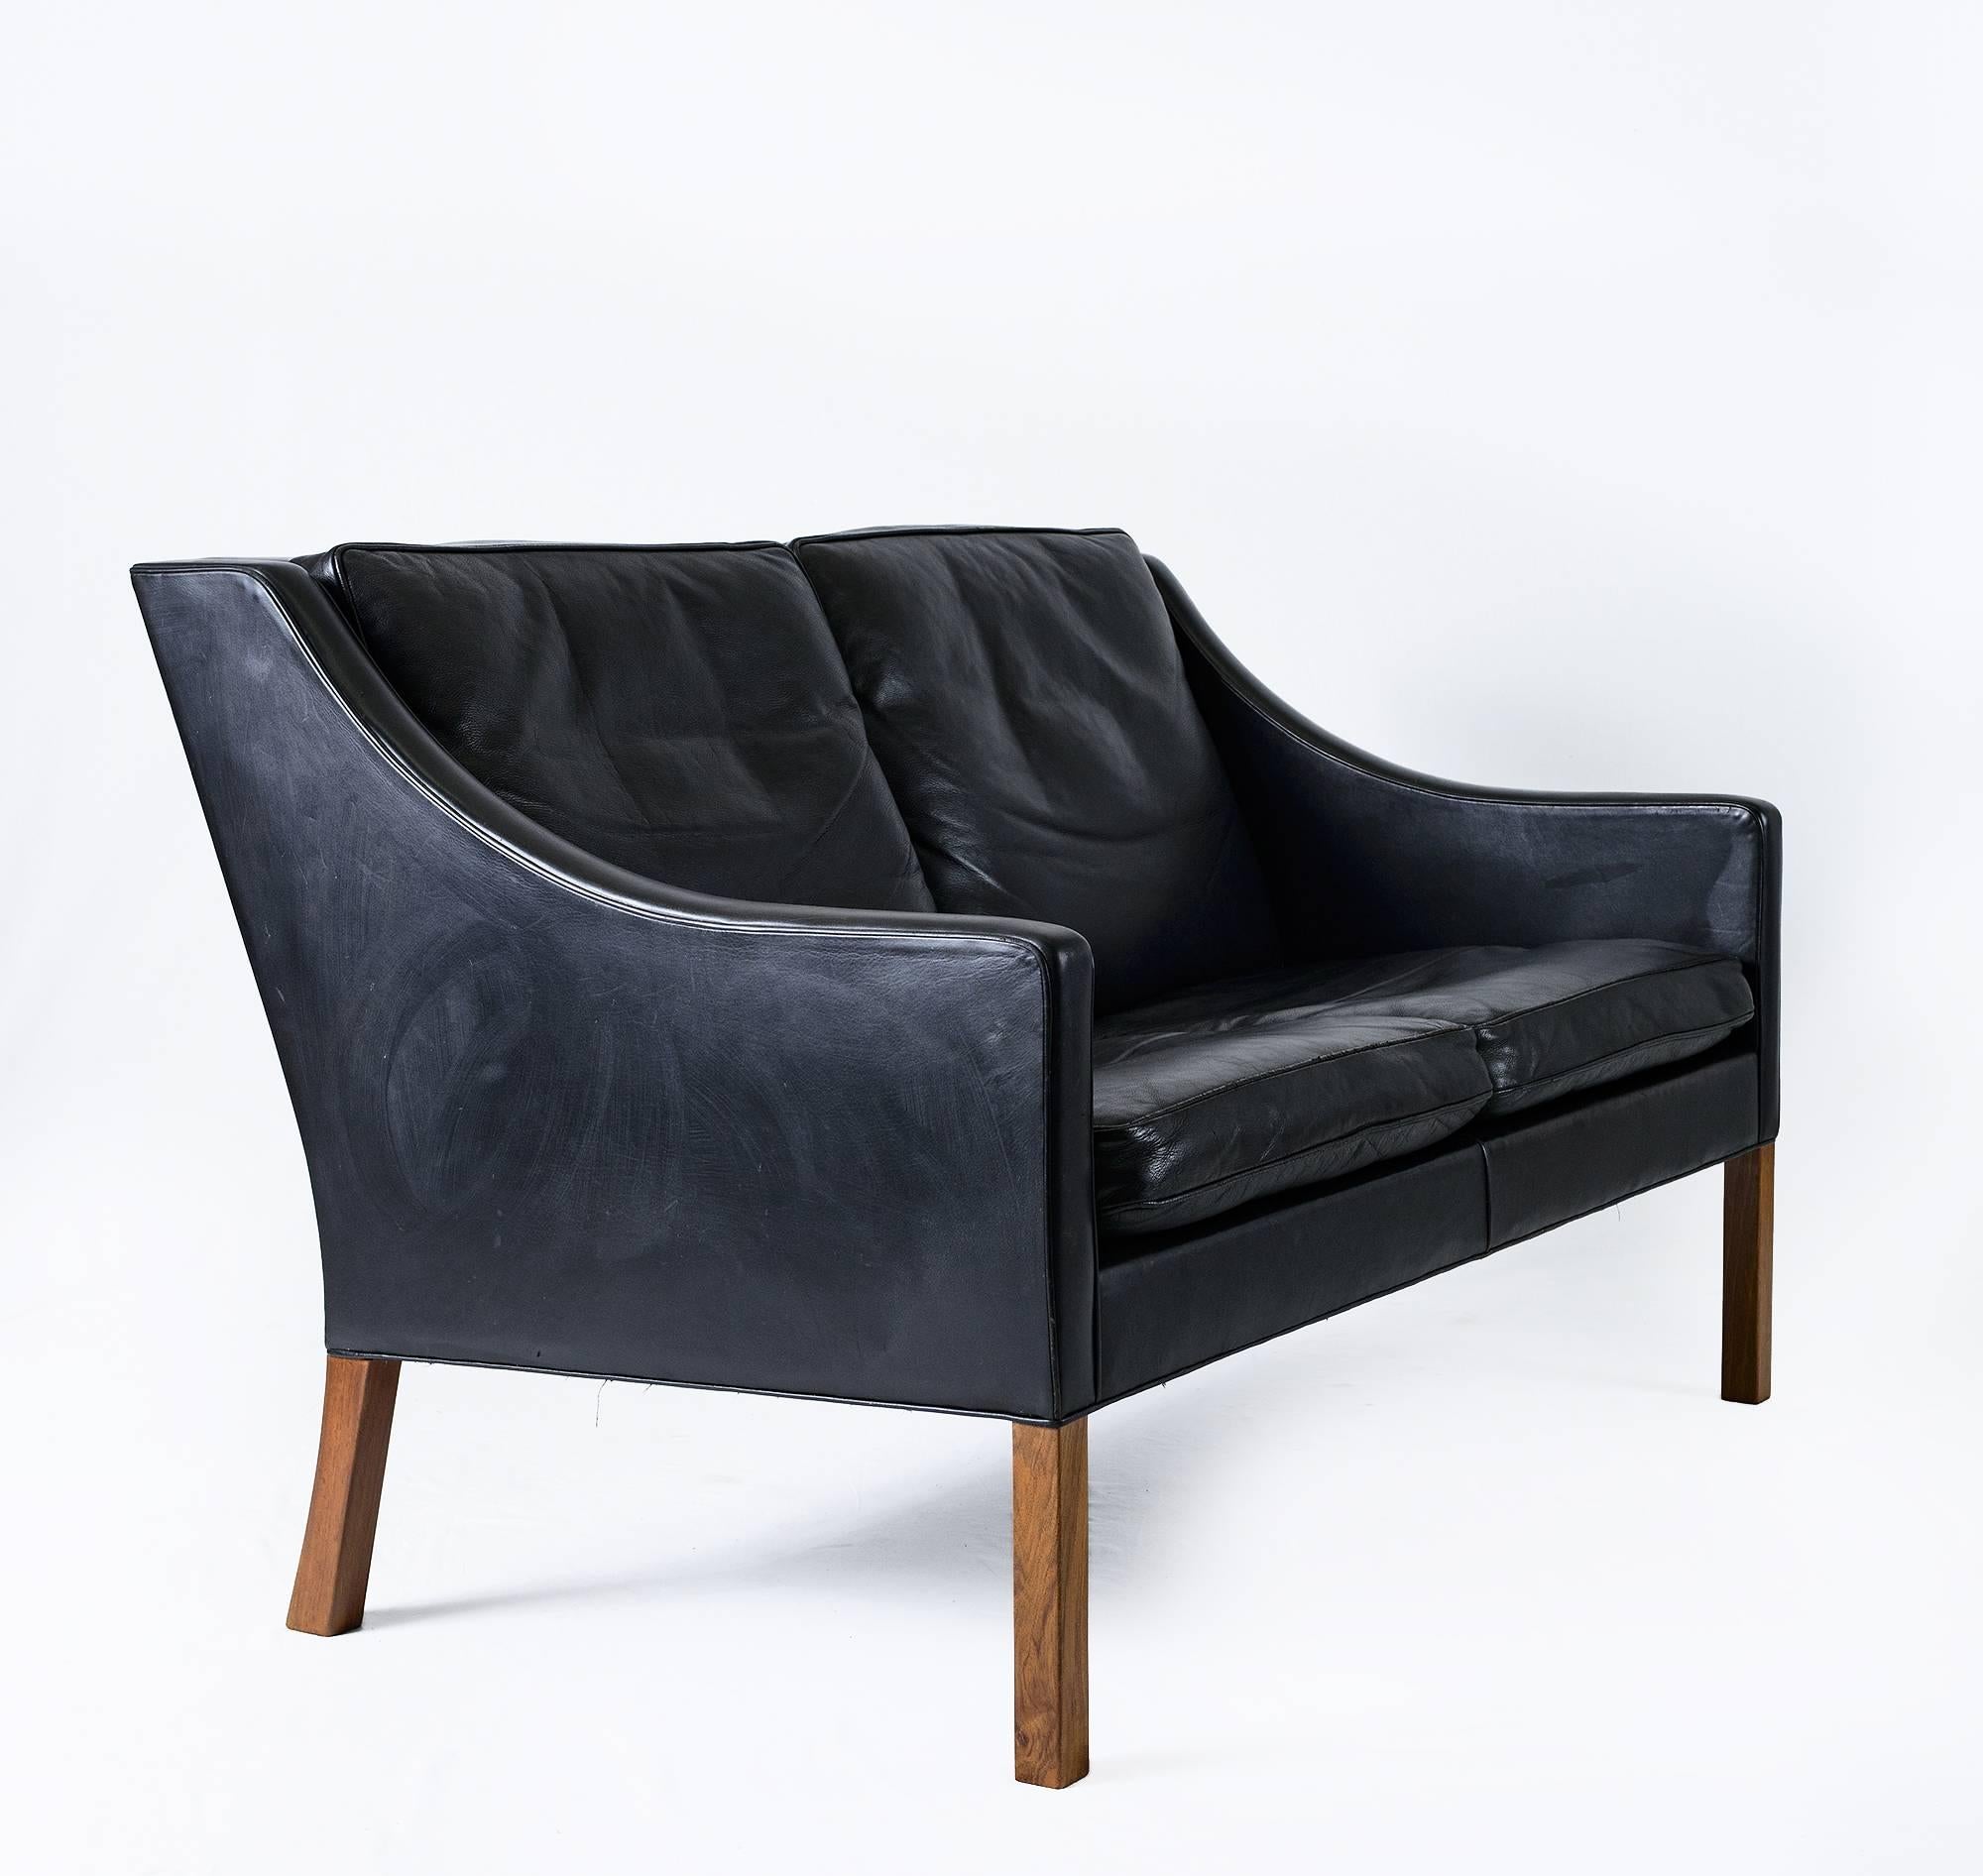 Børge Mogensen model no. 2208 two-seat sofa designed in 1963 and produced by Fredericia.